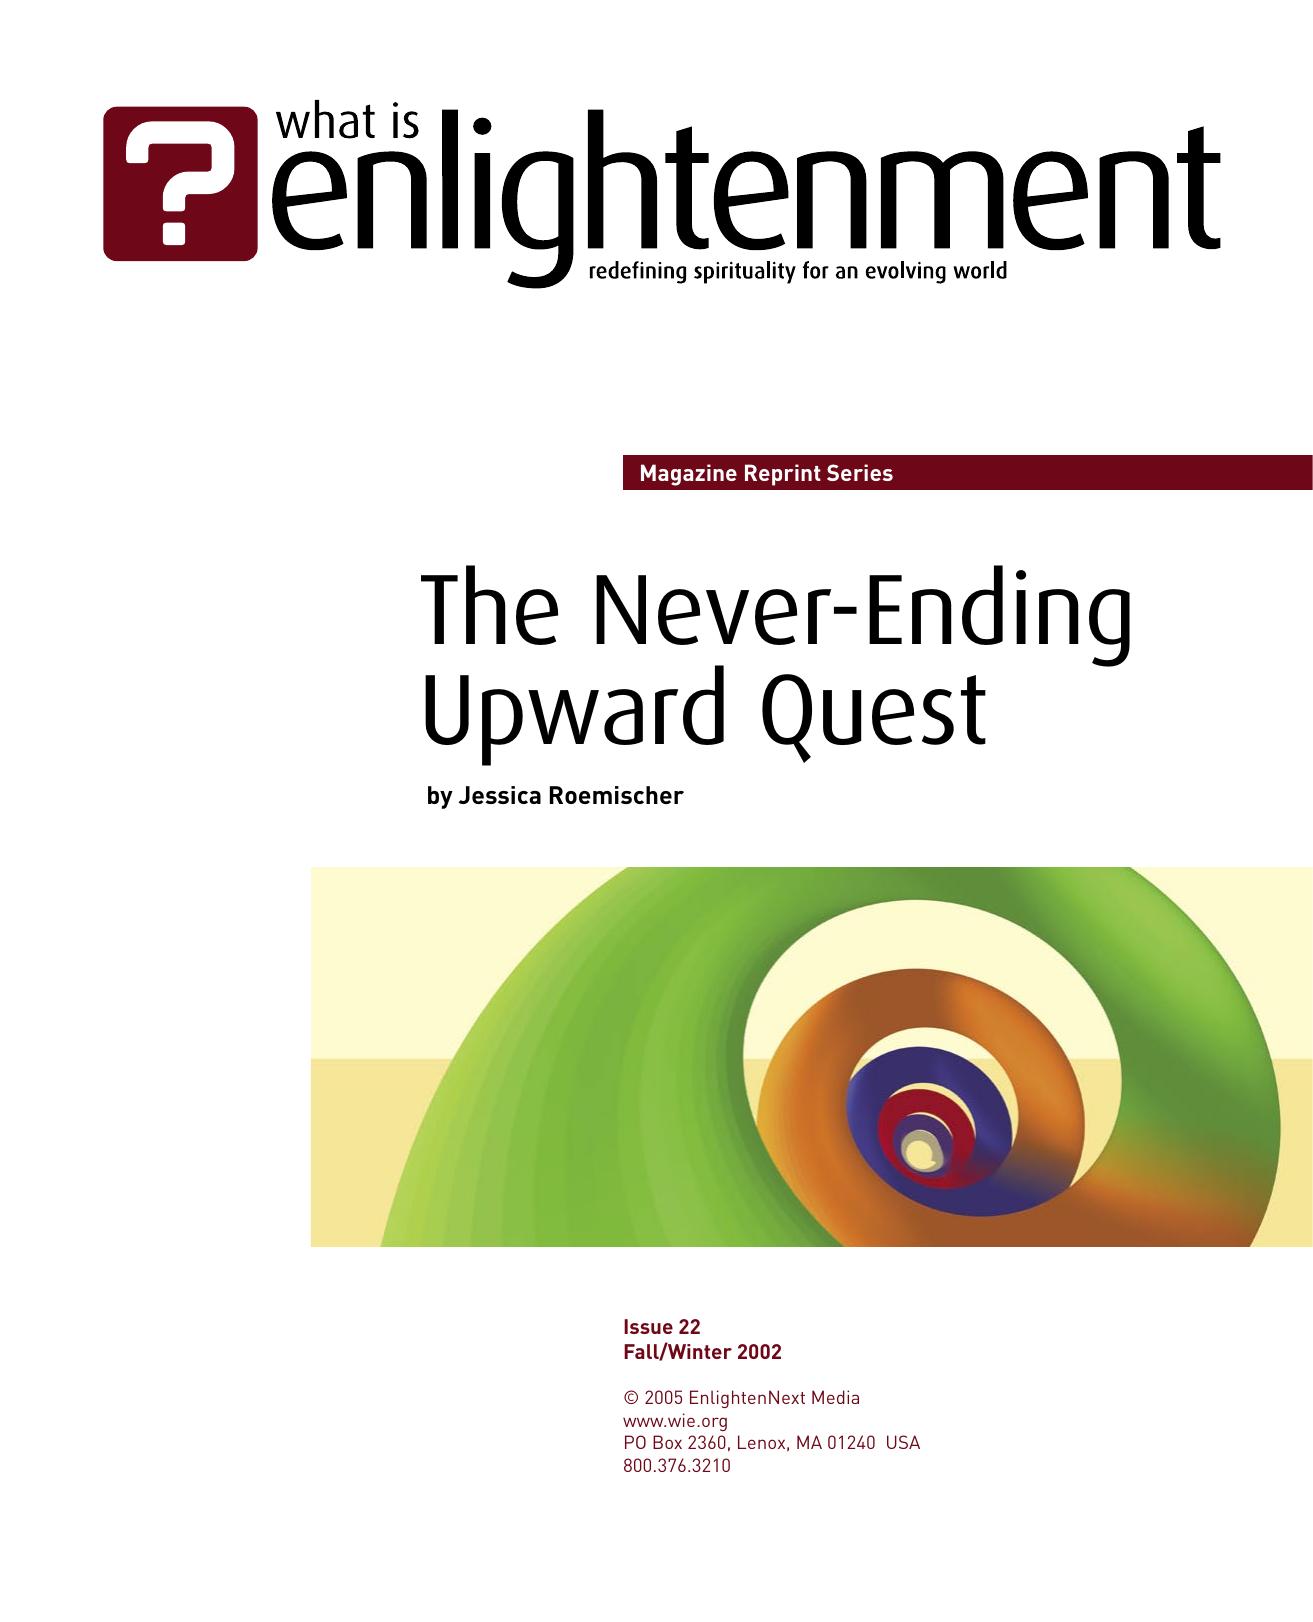 What is Enlightenment - The Never-Ending Upward Quest